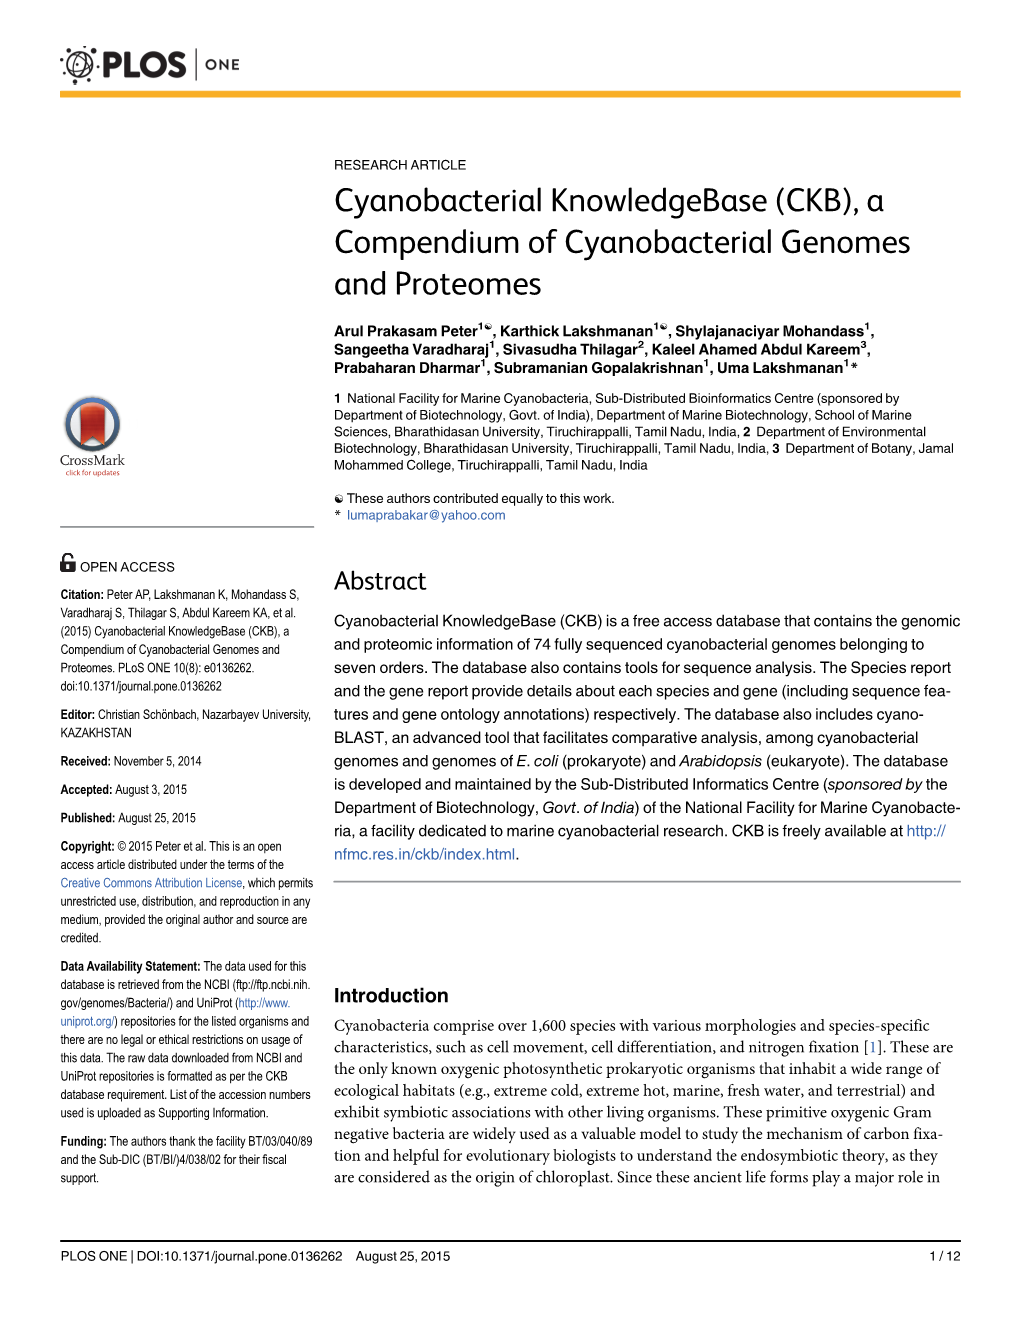 A Compendium of Cyanobacterial Genomes and Proteomes